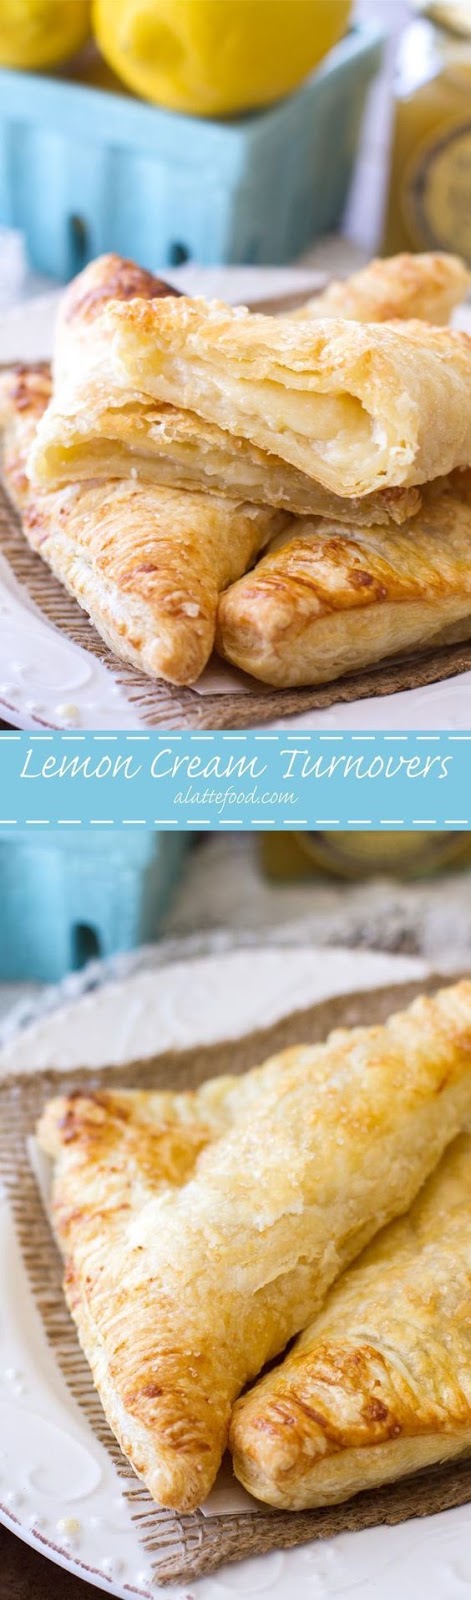 Easy lemon cream turnovers are so easy! Lemon curd and cream cheese are put inside puff pastry and baked up to lemon cheesecake turnovers recipe perfection! #lemon #cheesecake #turnovers #dessert #recipe